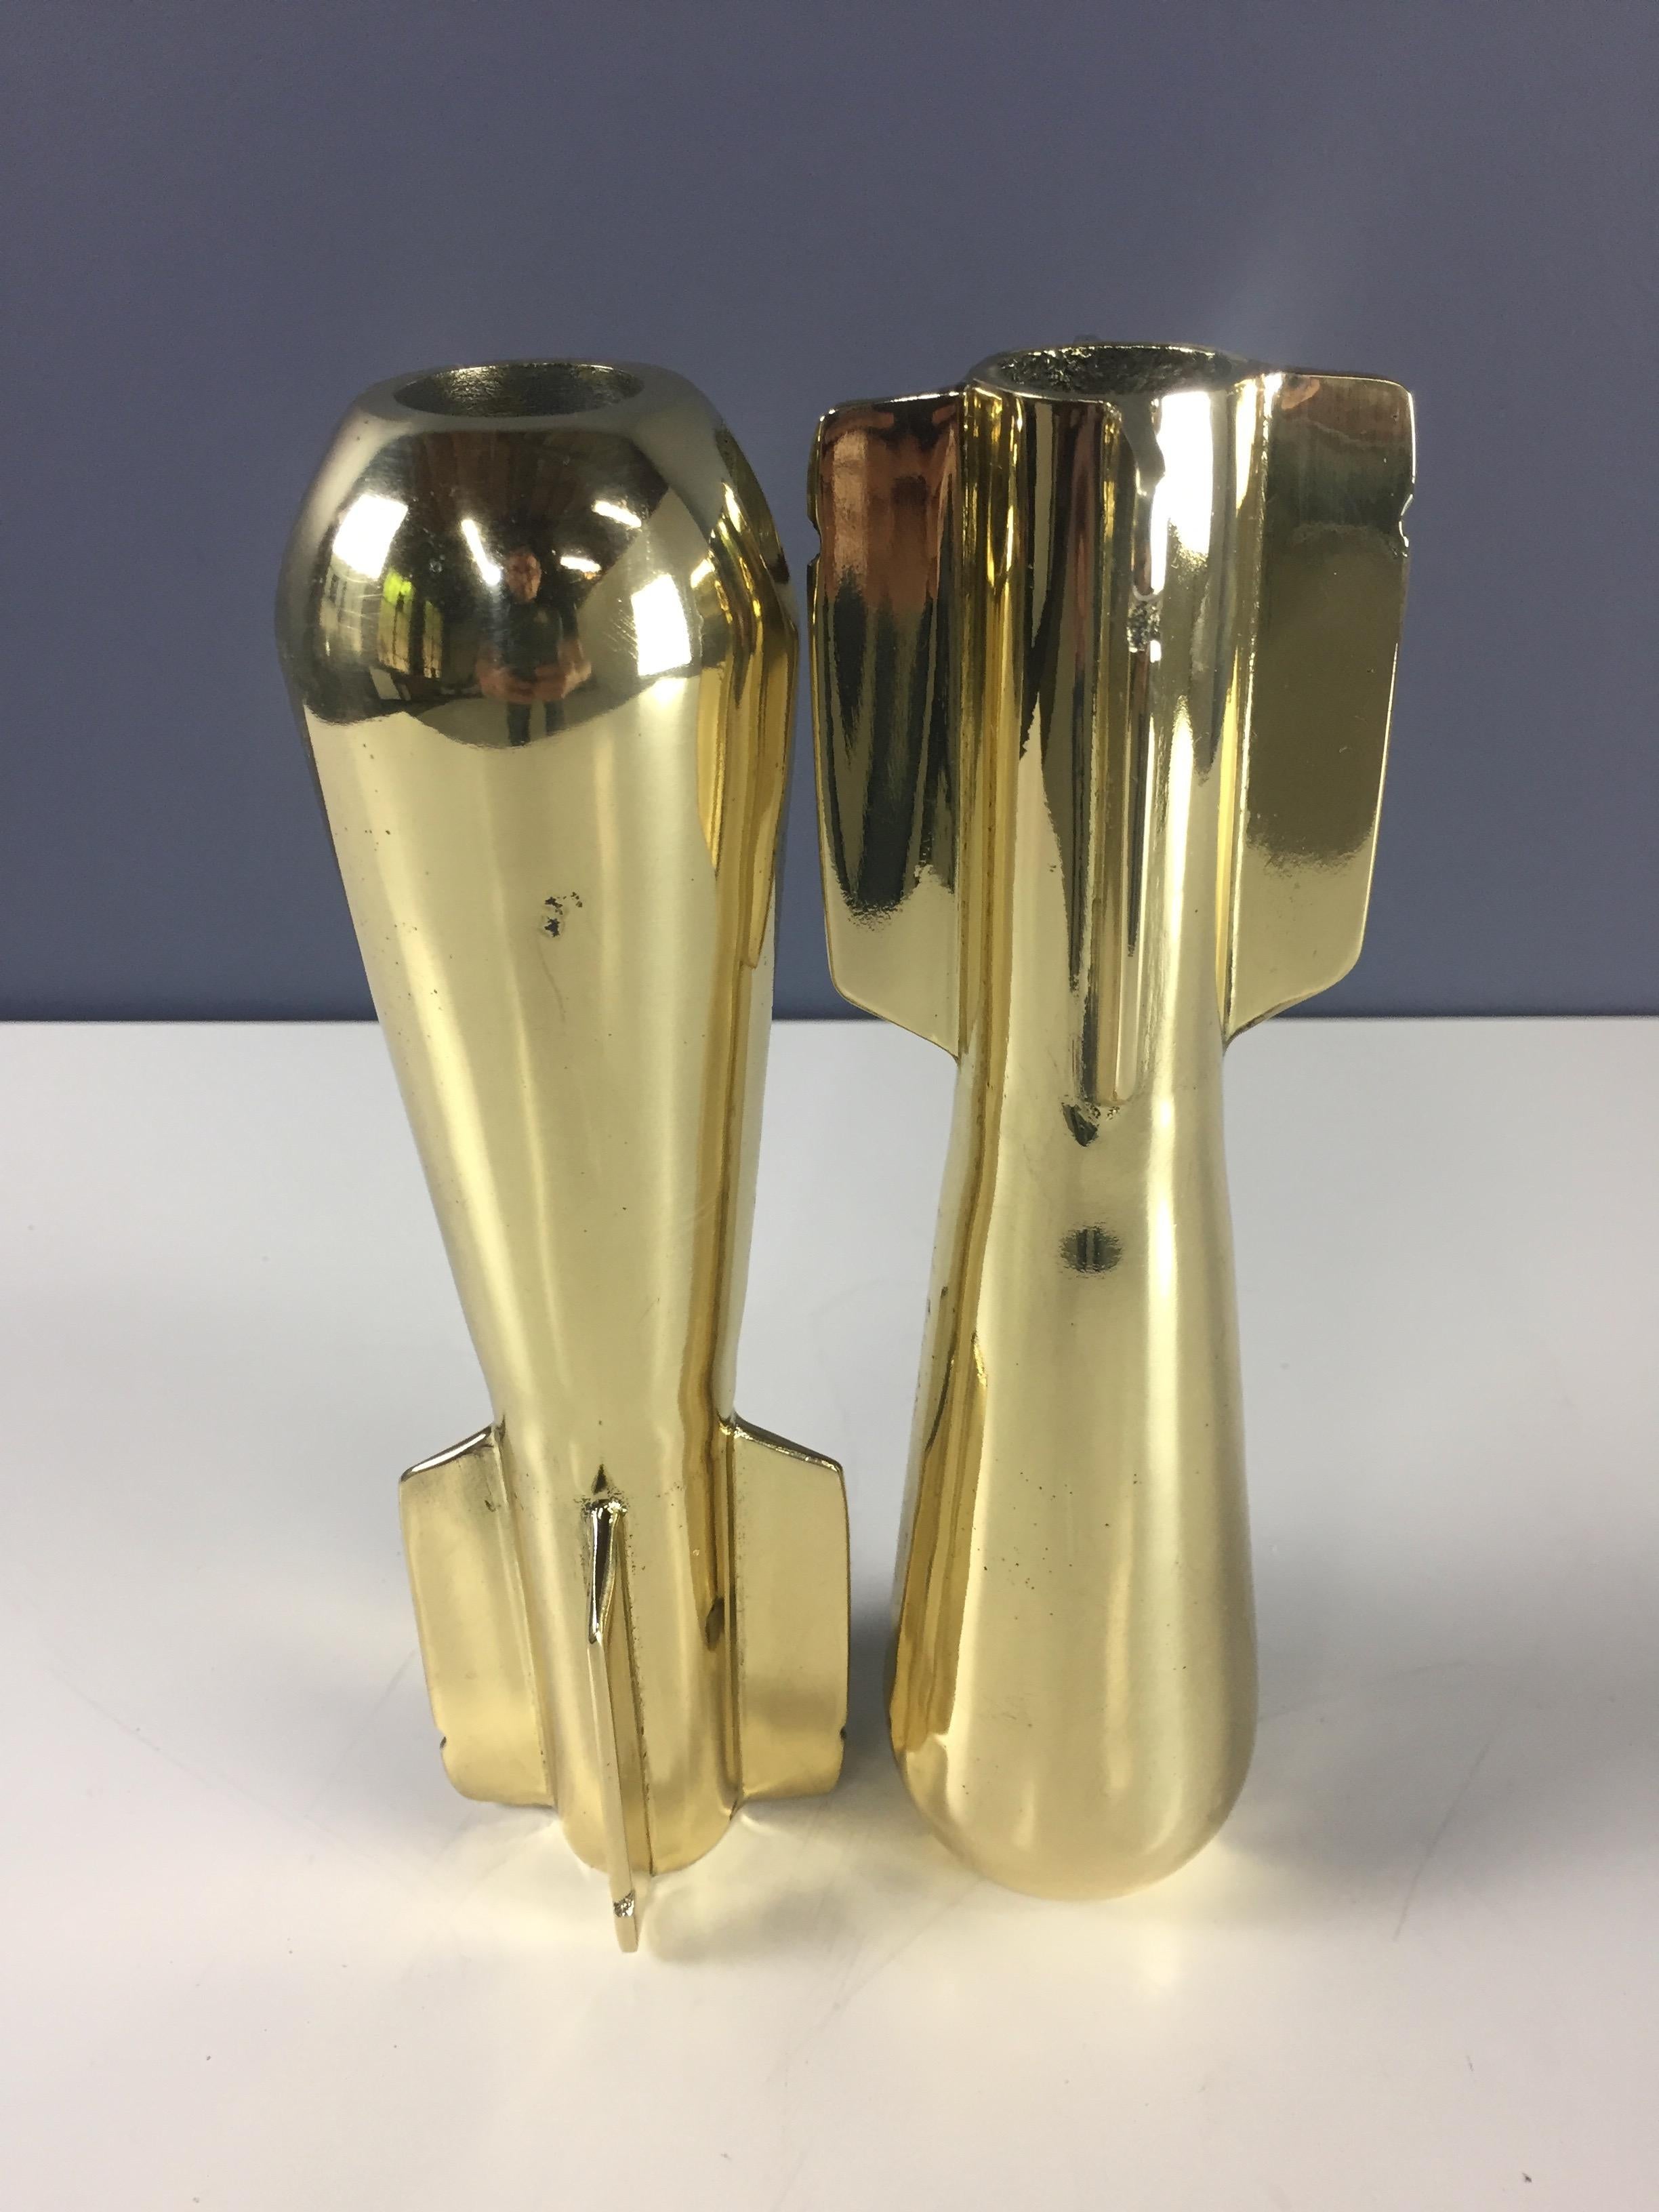 Brassed WWII Era Mortar Shell Paperweights or Bookends Midcentury In Excellent Condition For Sale In Philadelphia, PA